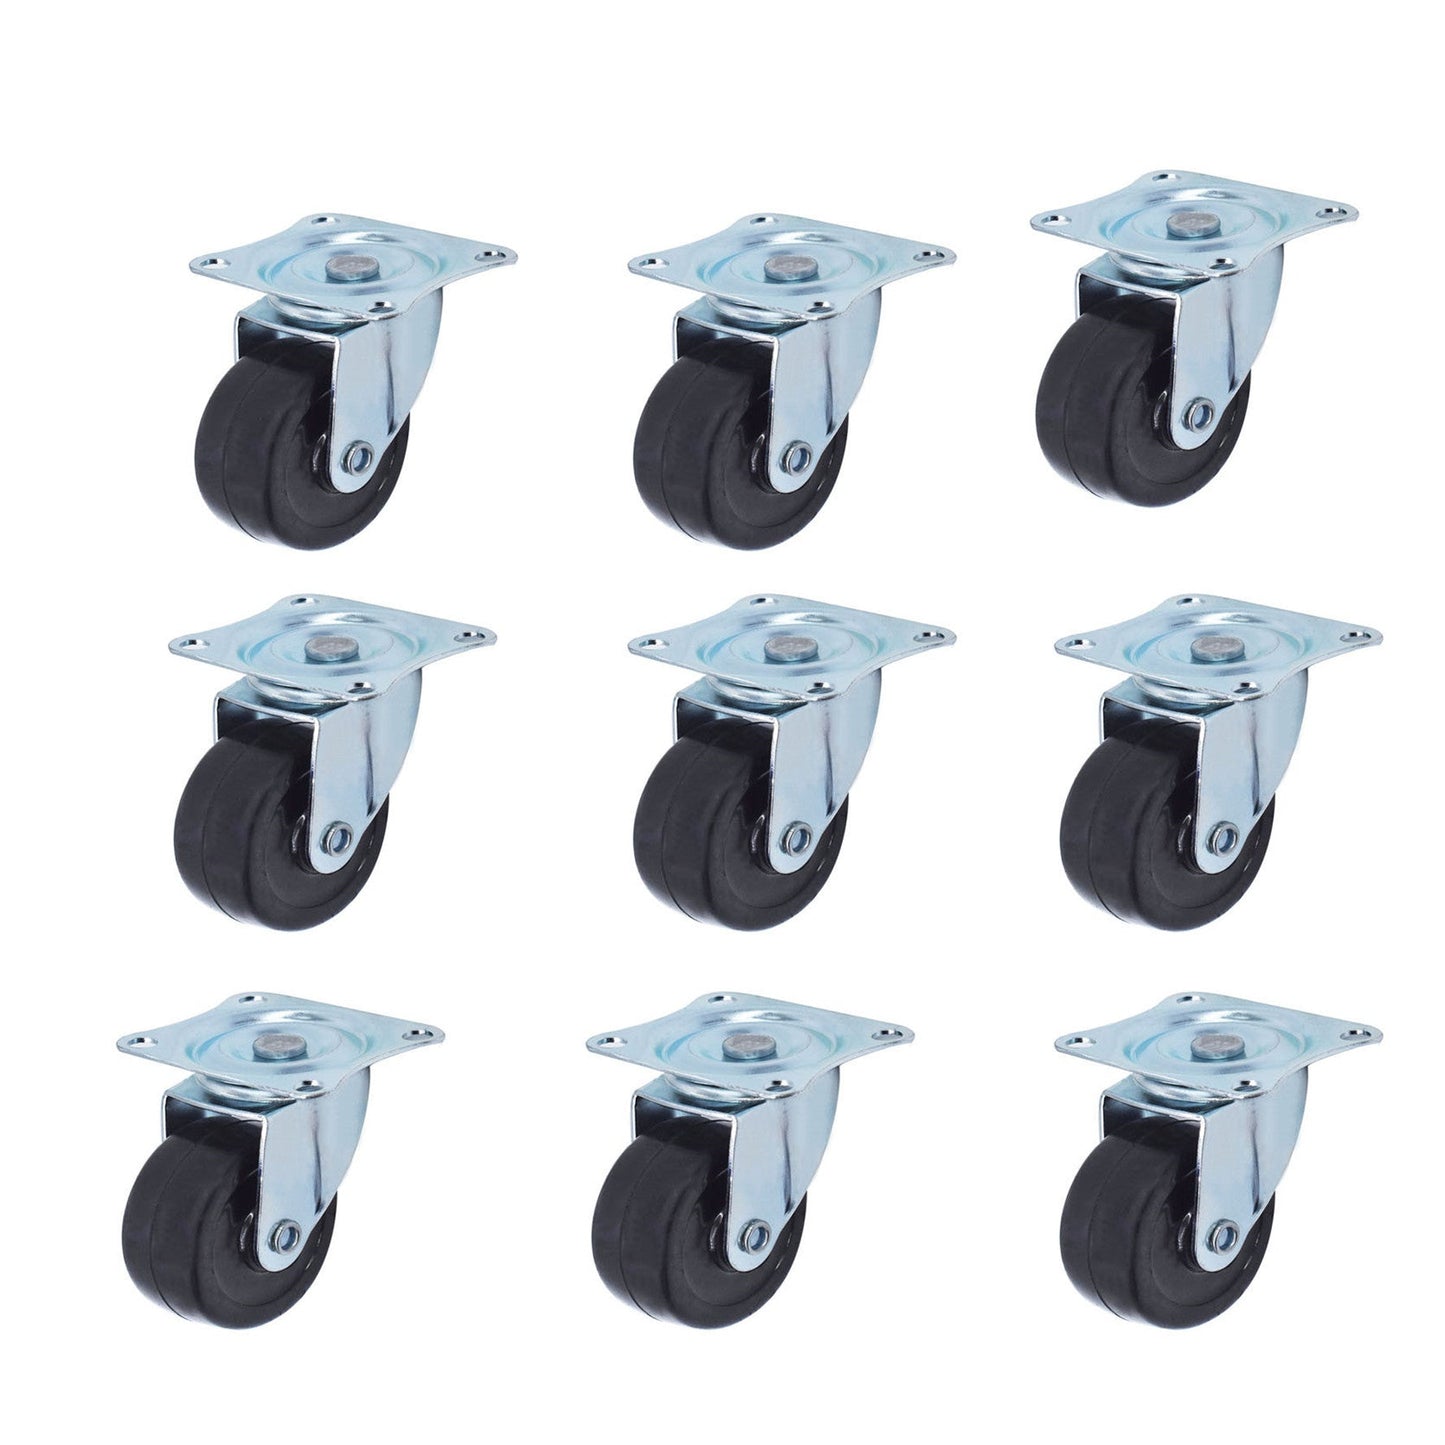 findmall Heavy Duty Swivel Caster Wheels 24 Pack 2 Inch Rubber Base with Top Plate & Bearing FINDMALLPARTS